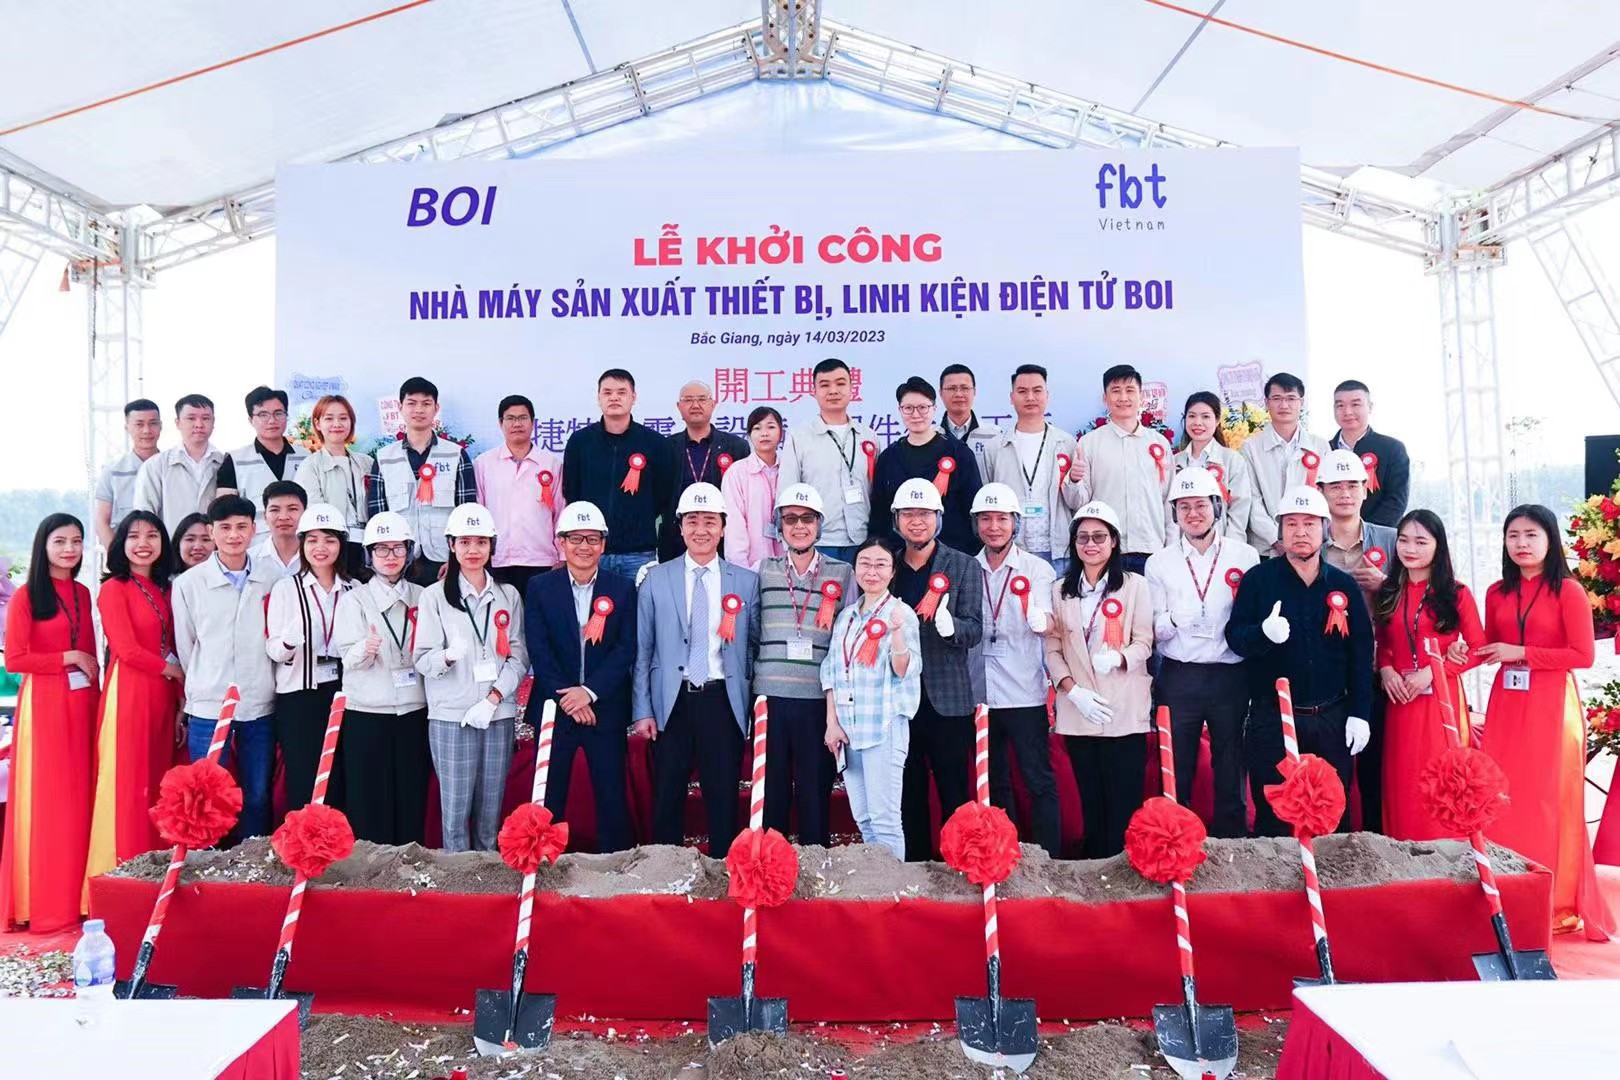 On March 14, 2023, the commencement ceremony of BOI's new factory project was held in Bac Giang Province, Vietnam